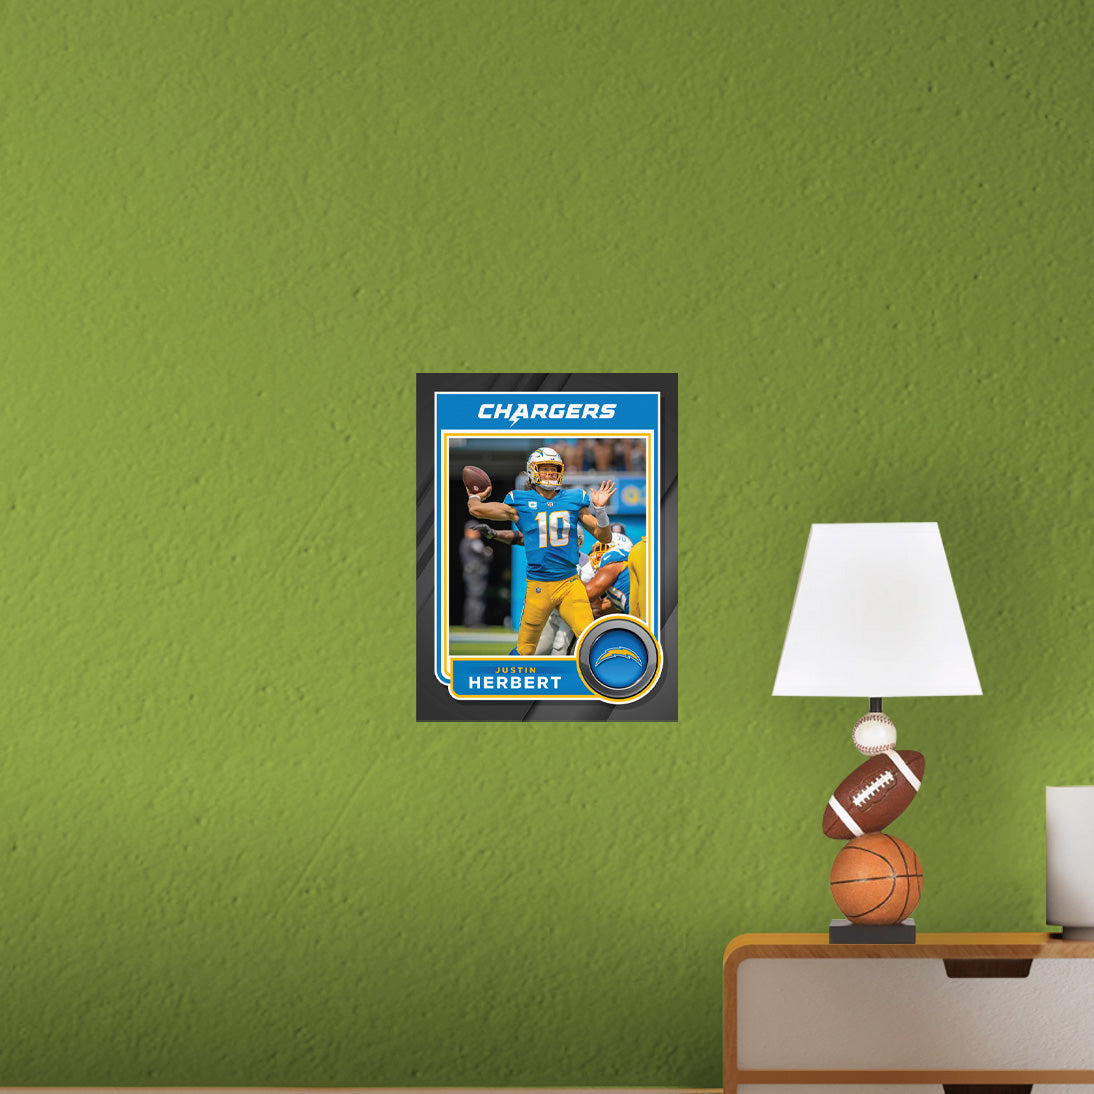 Los Angeles Chargers: Justin Herbert Poster - Officially Licensed NFL Removable Adhesive Decal